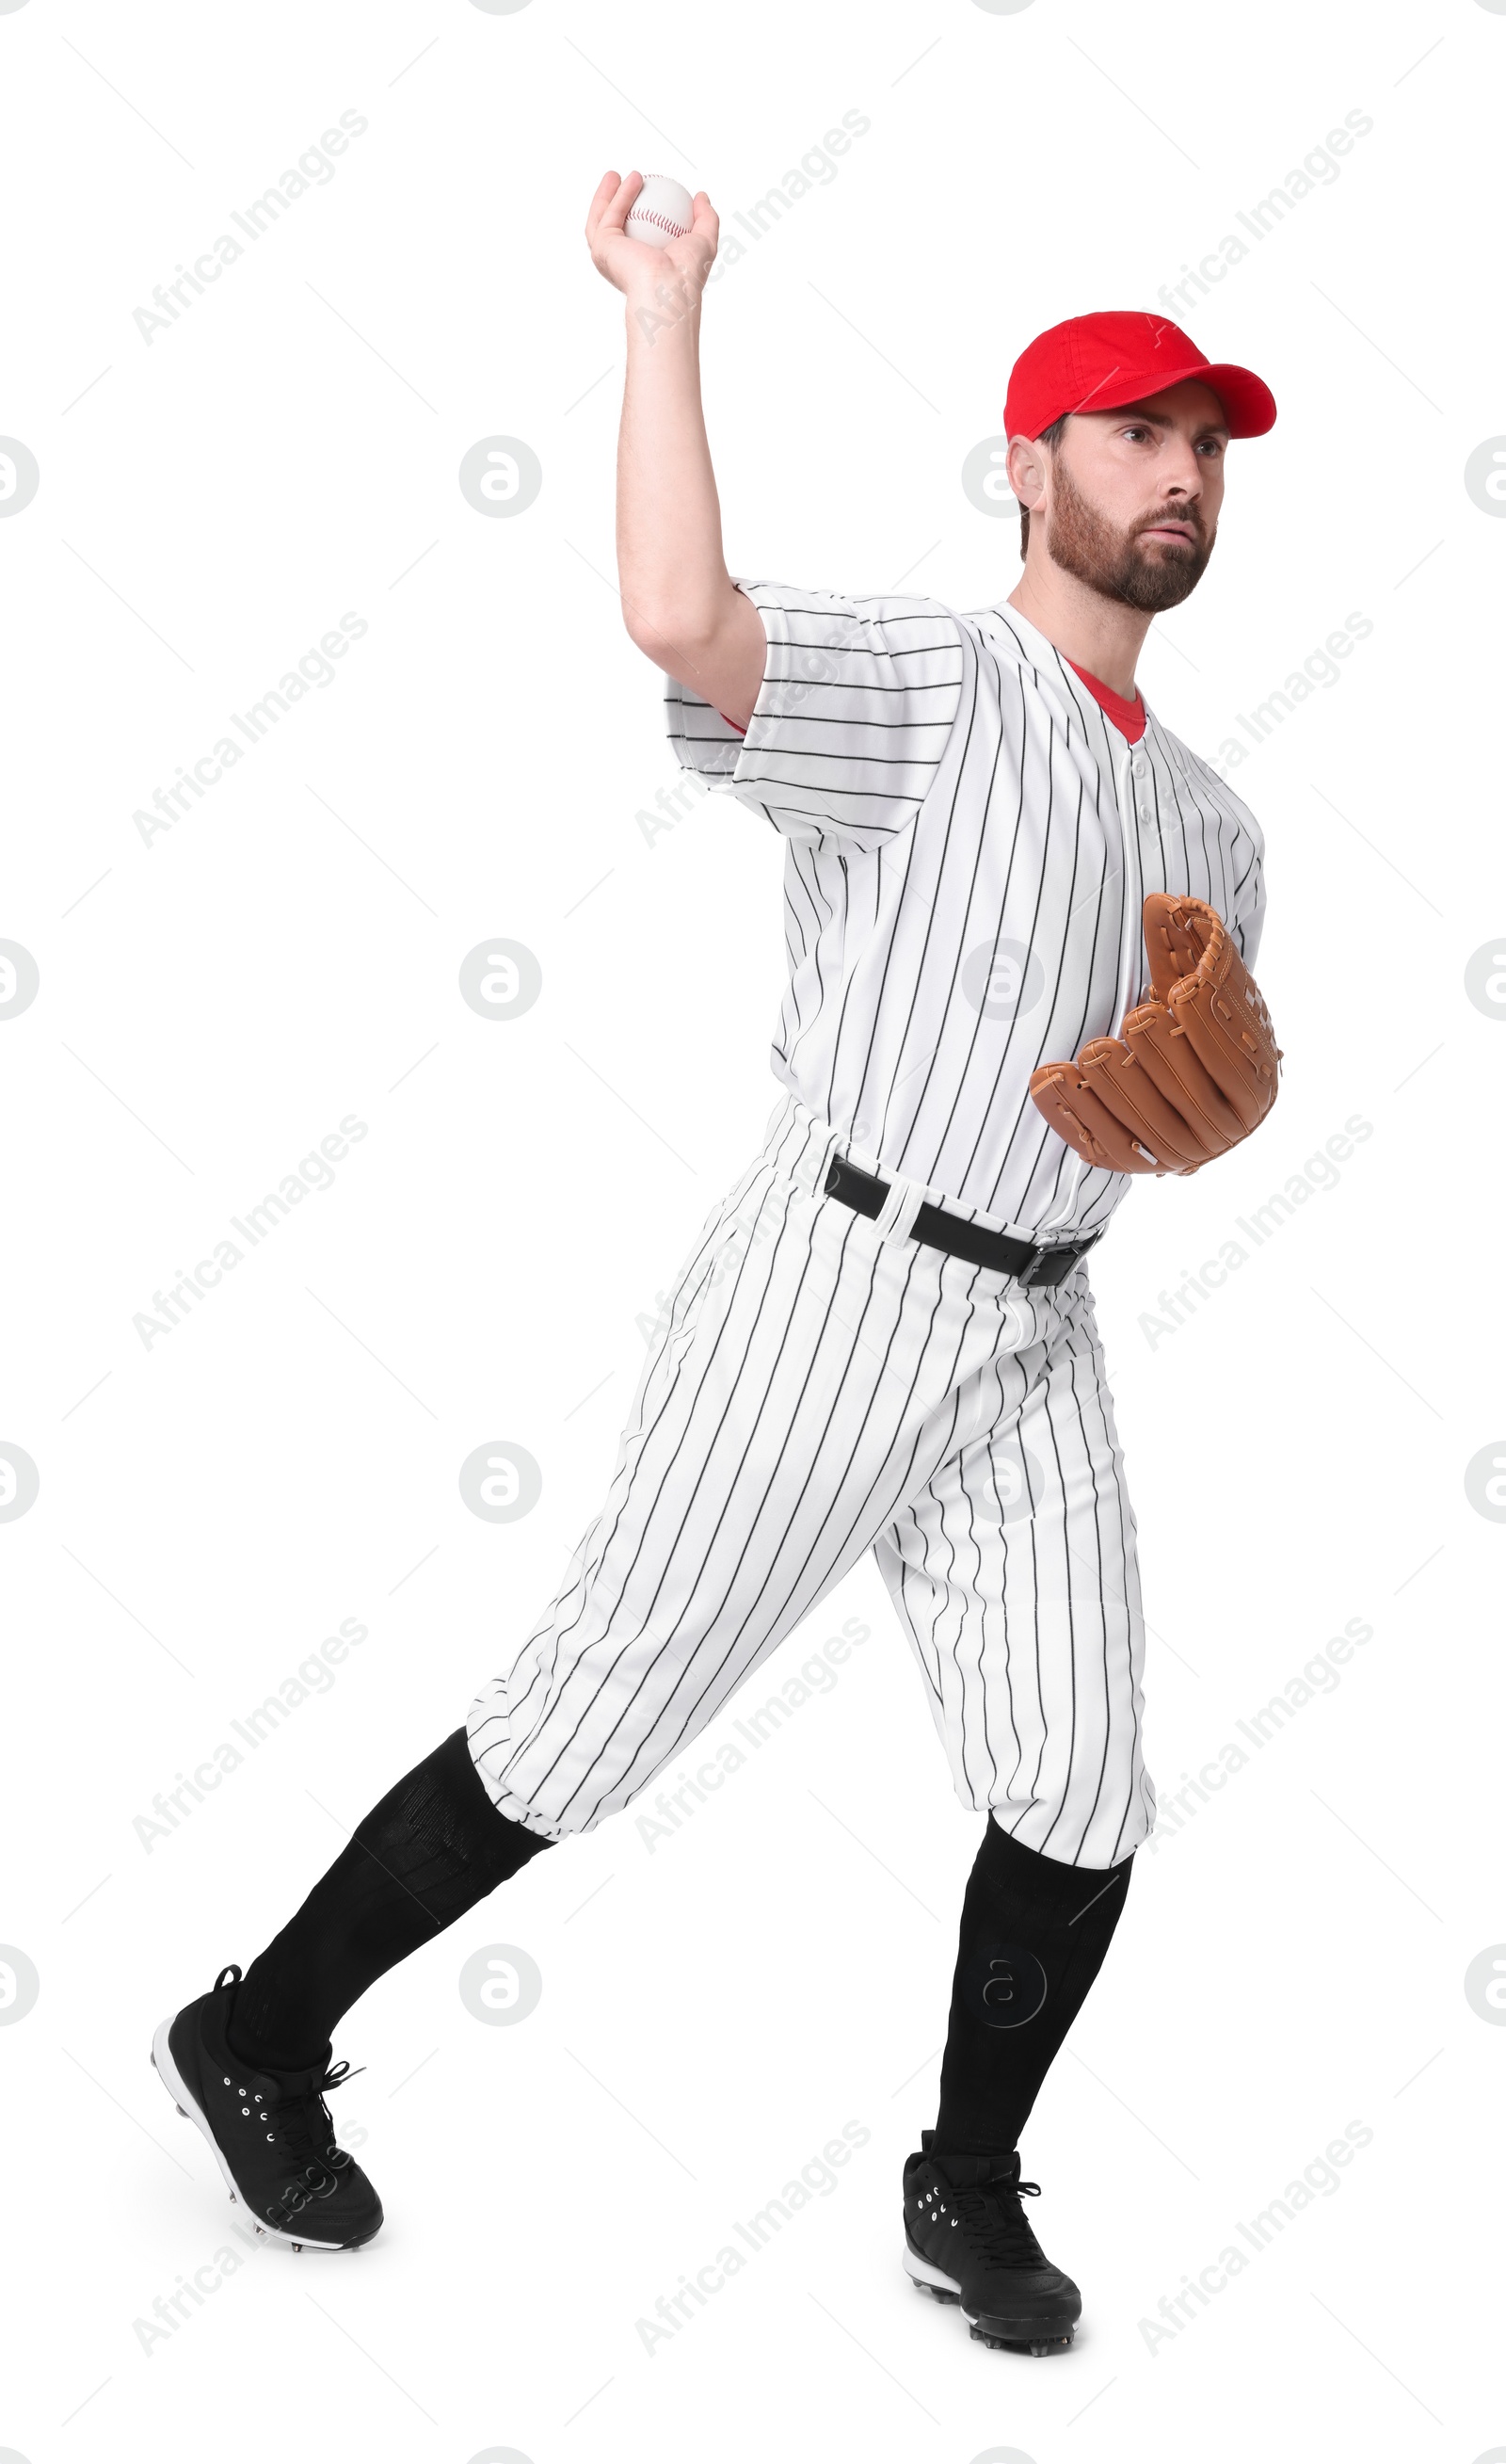 Photo of Baseball player throwing ball on white background